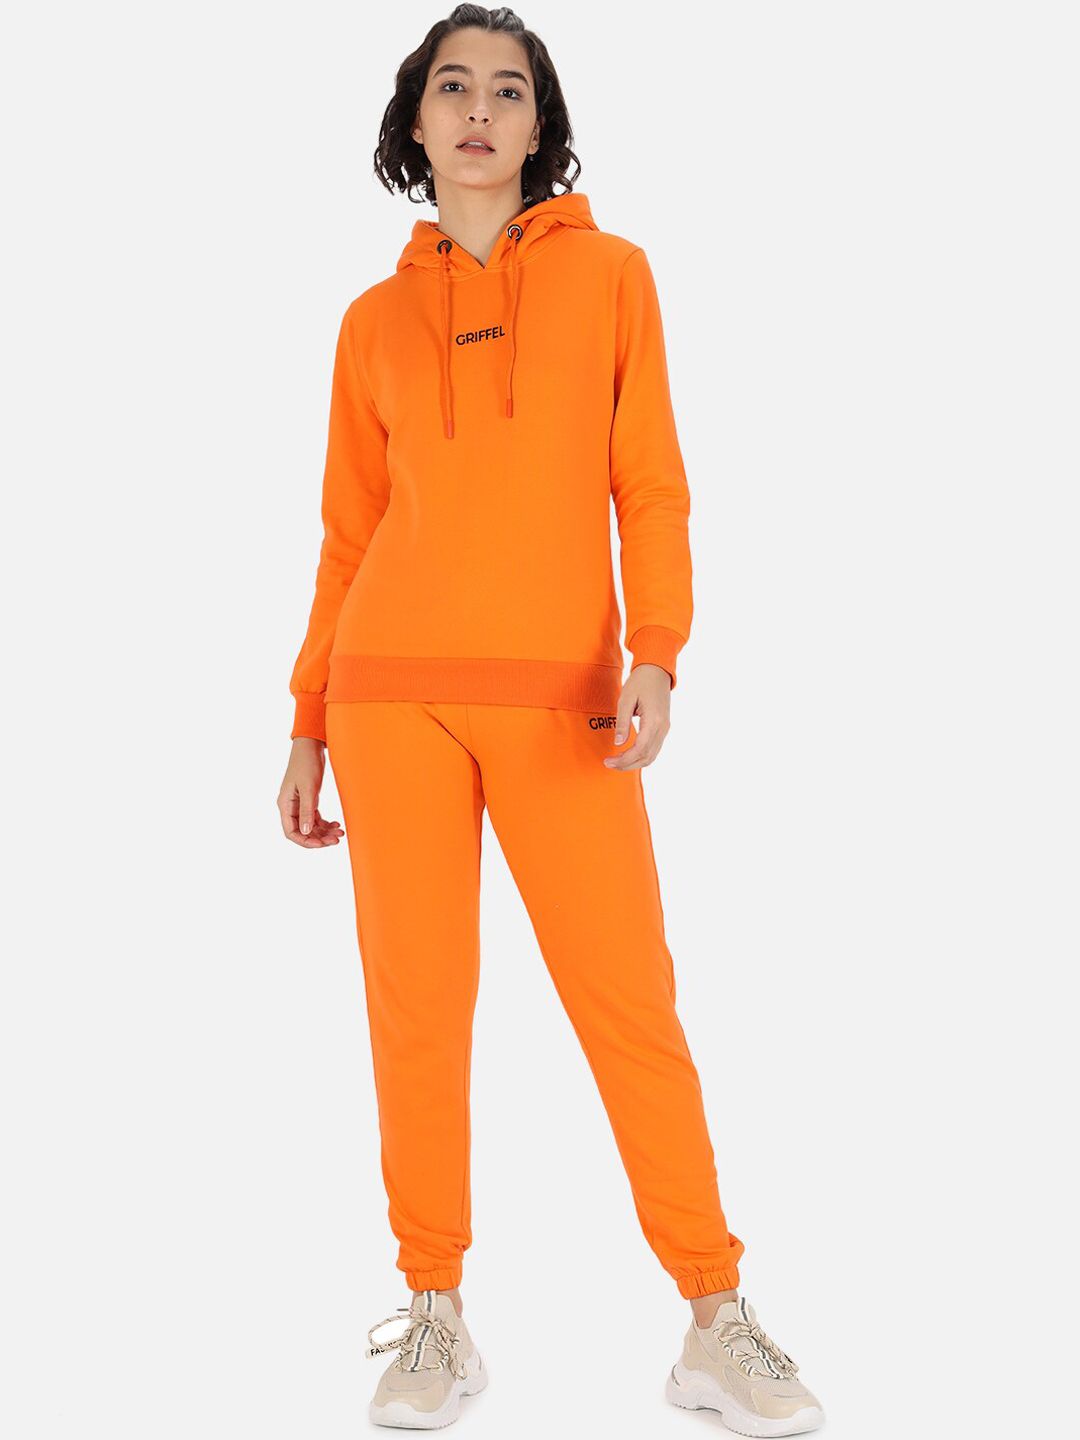 GRIFFEL Women Orange Solid Cotton Tracksuits Price in India